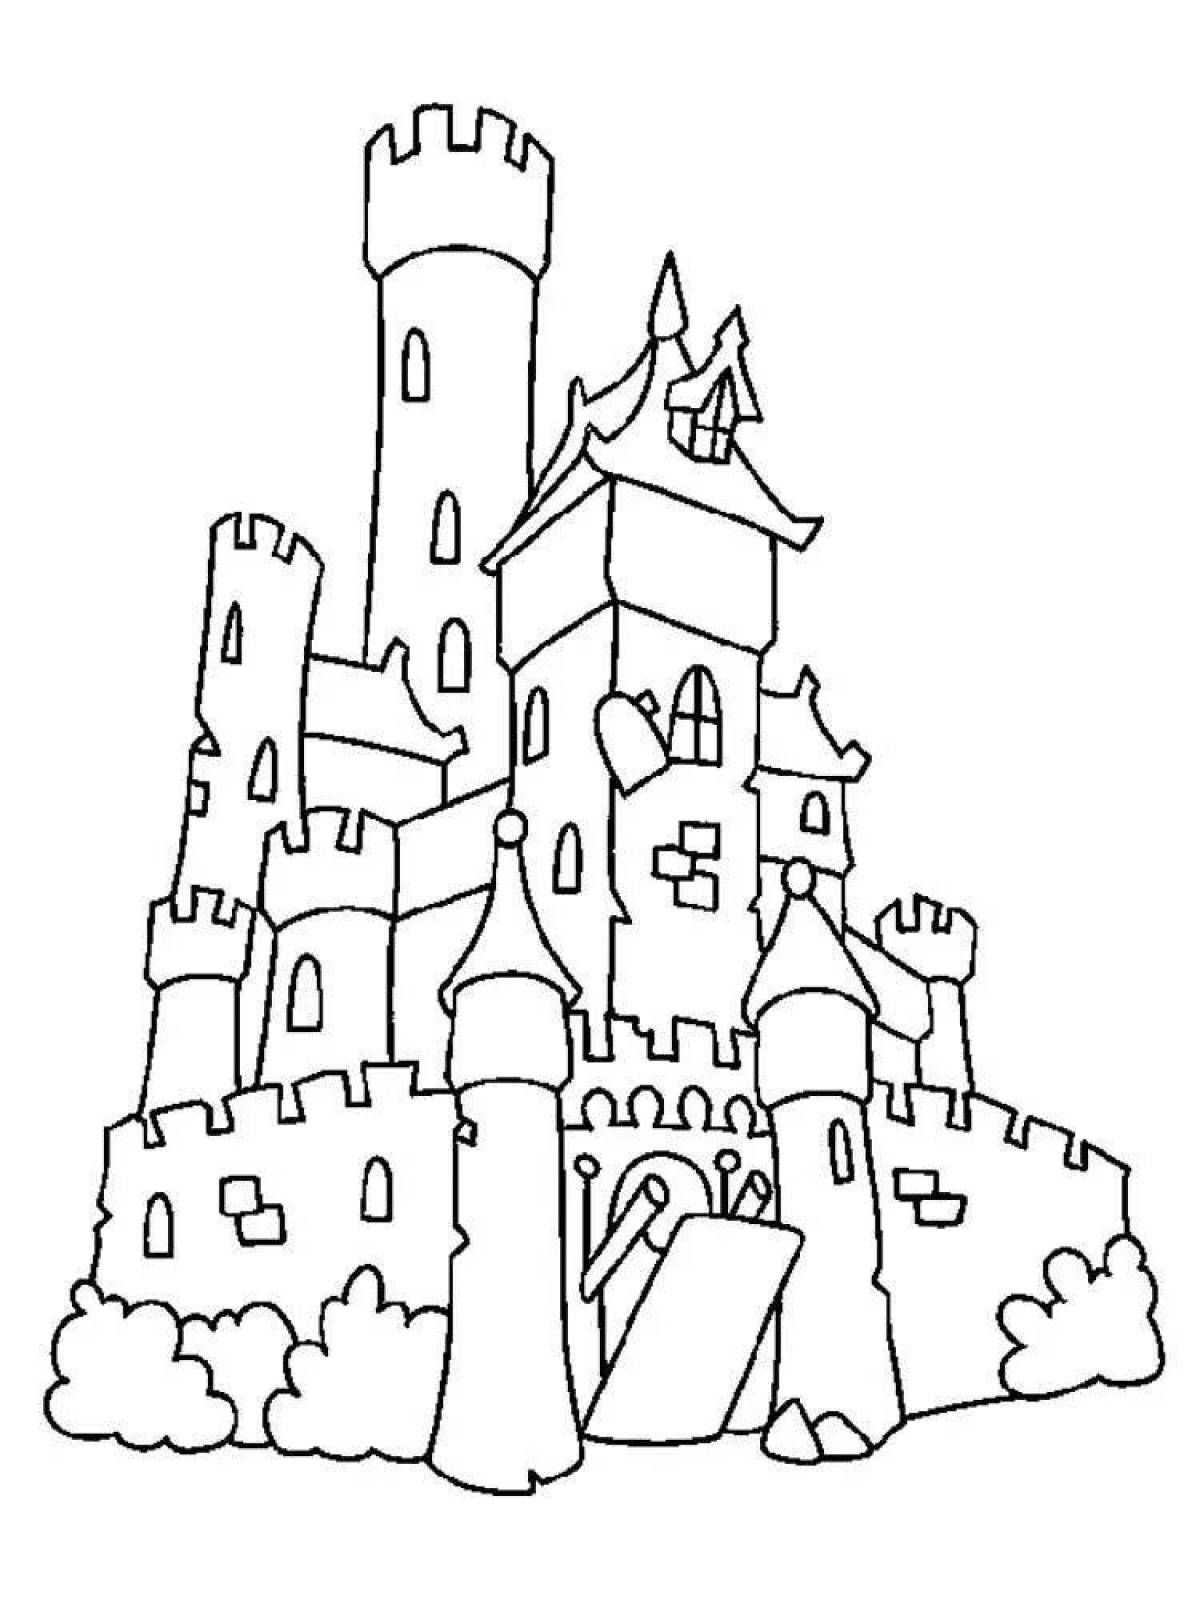 Splendid fortress coloring book for kids